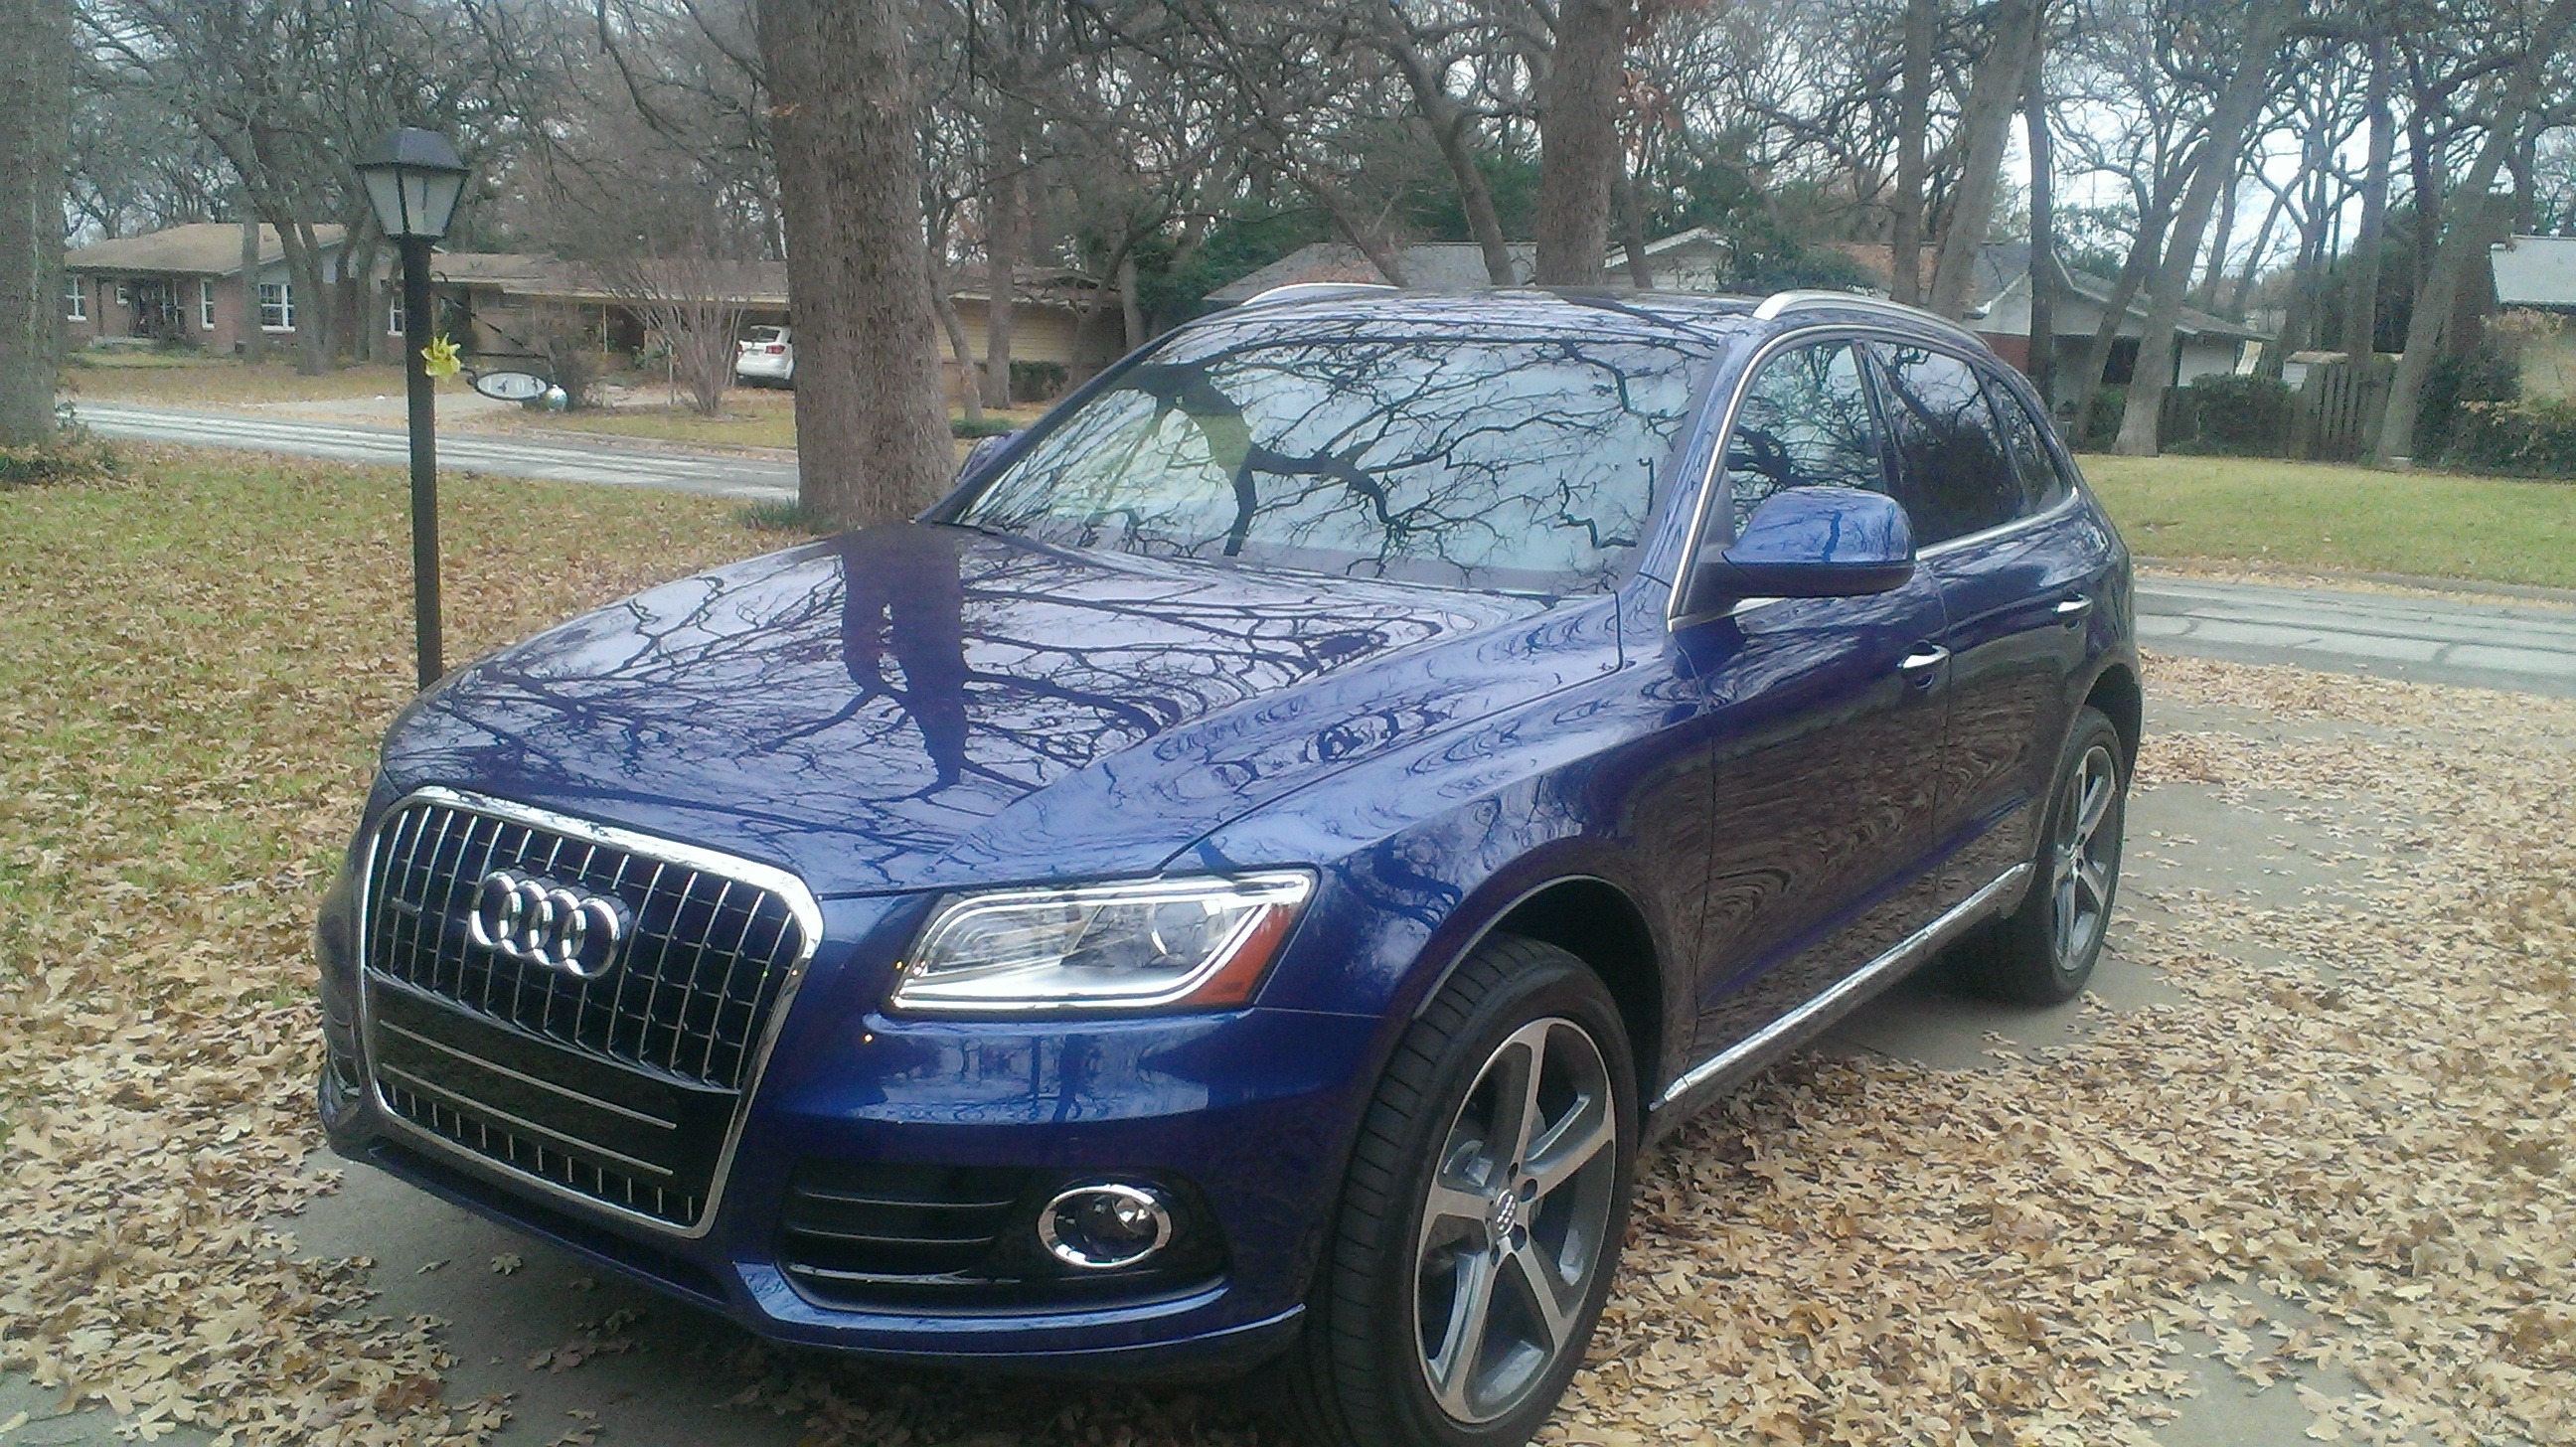 AUDI Q5 2015: With 7 trims, the 2015 Audi Q5 is a car made of choices -  Washington Times